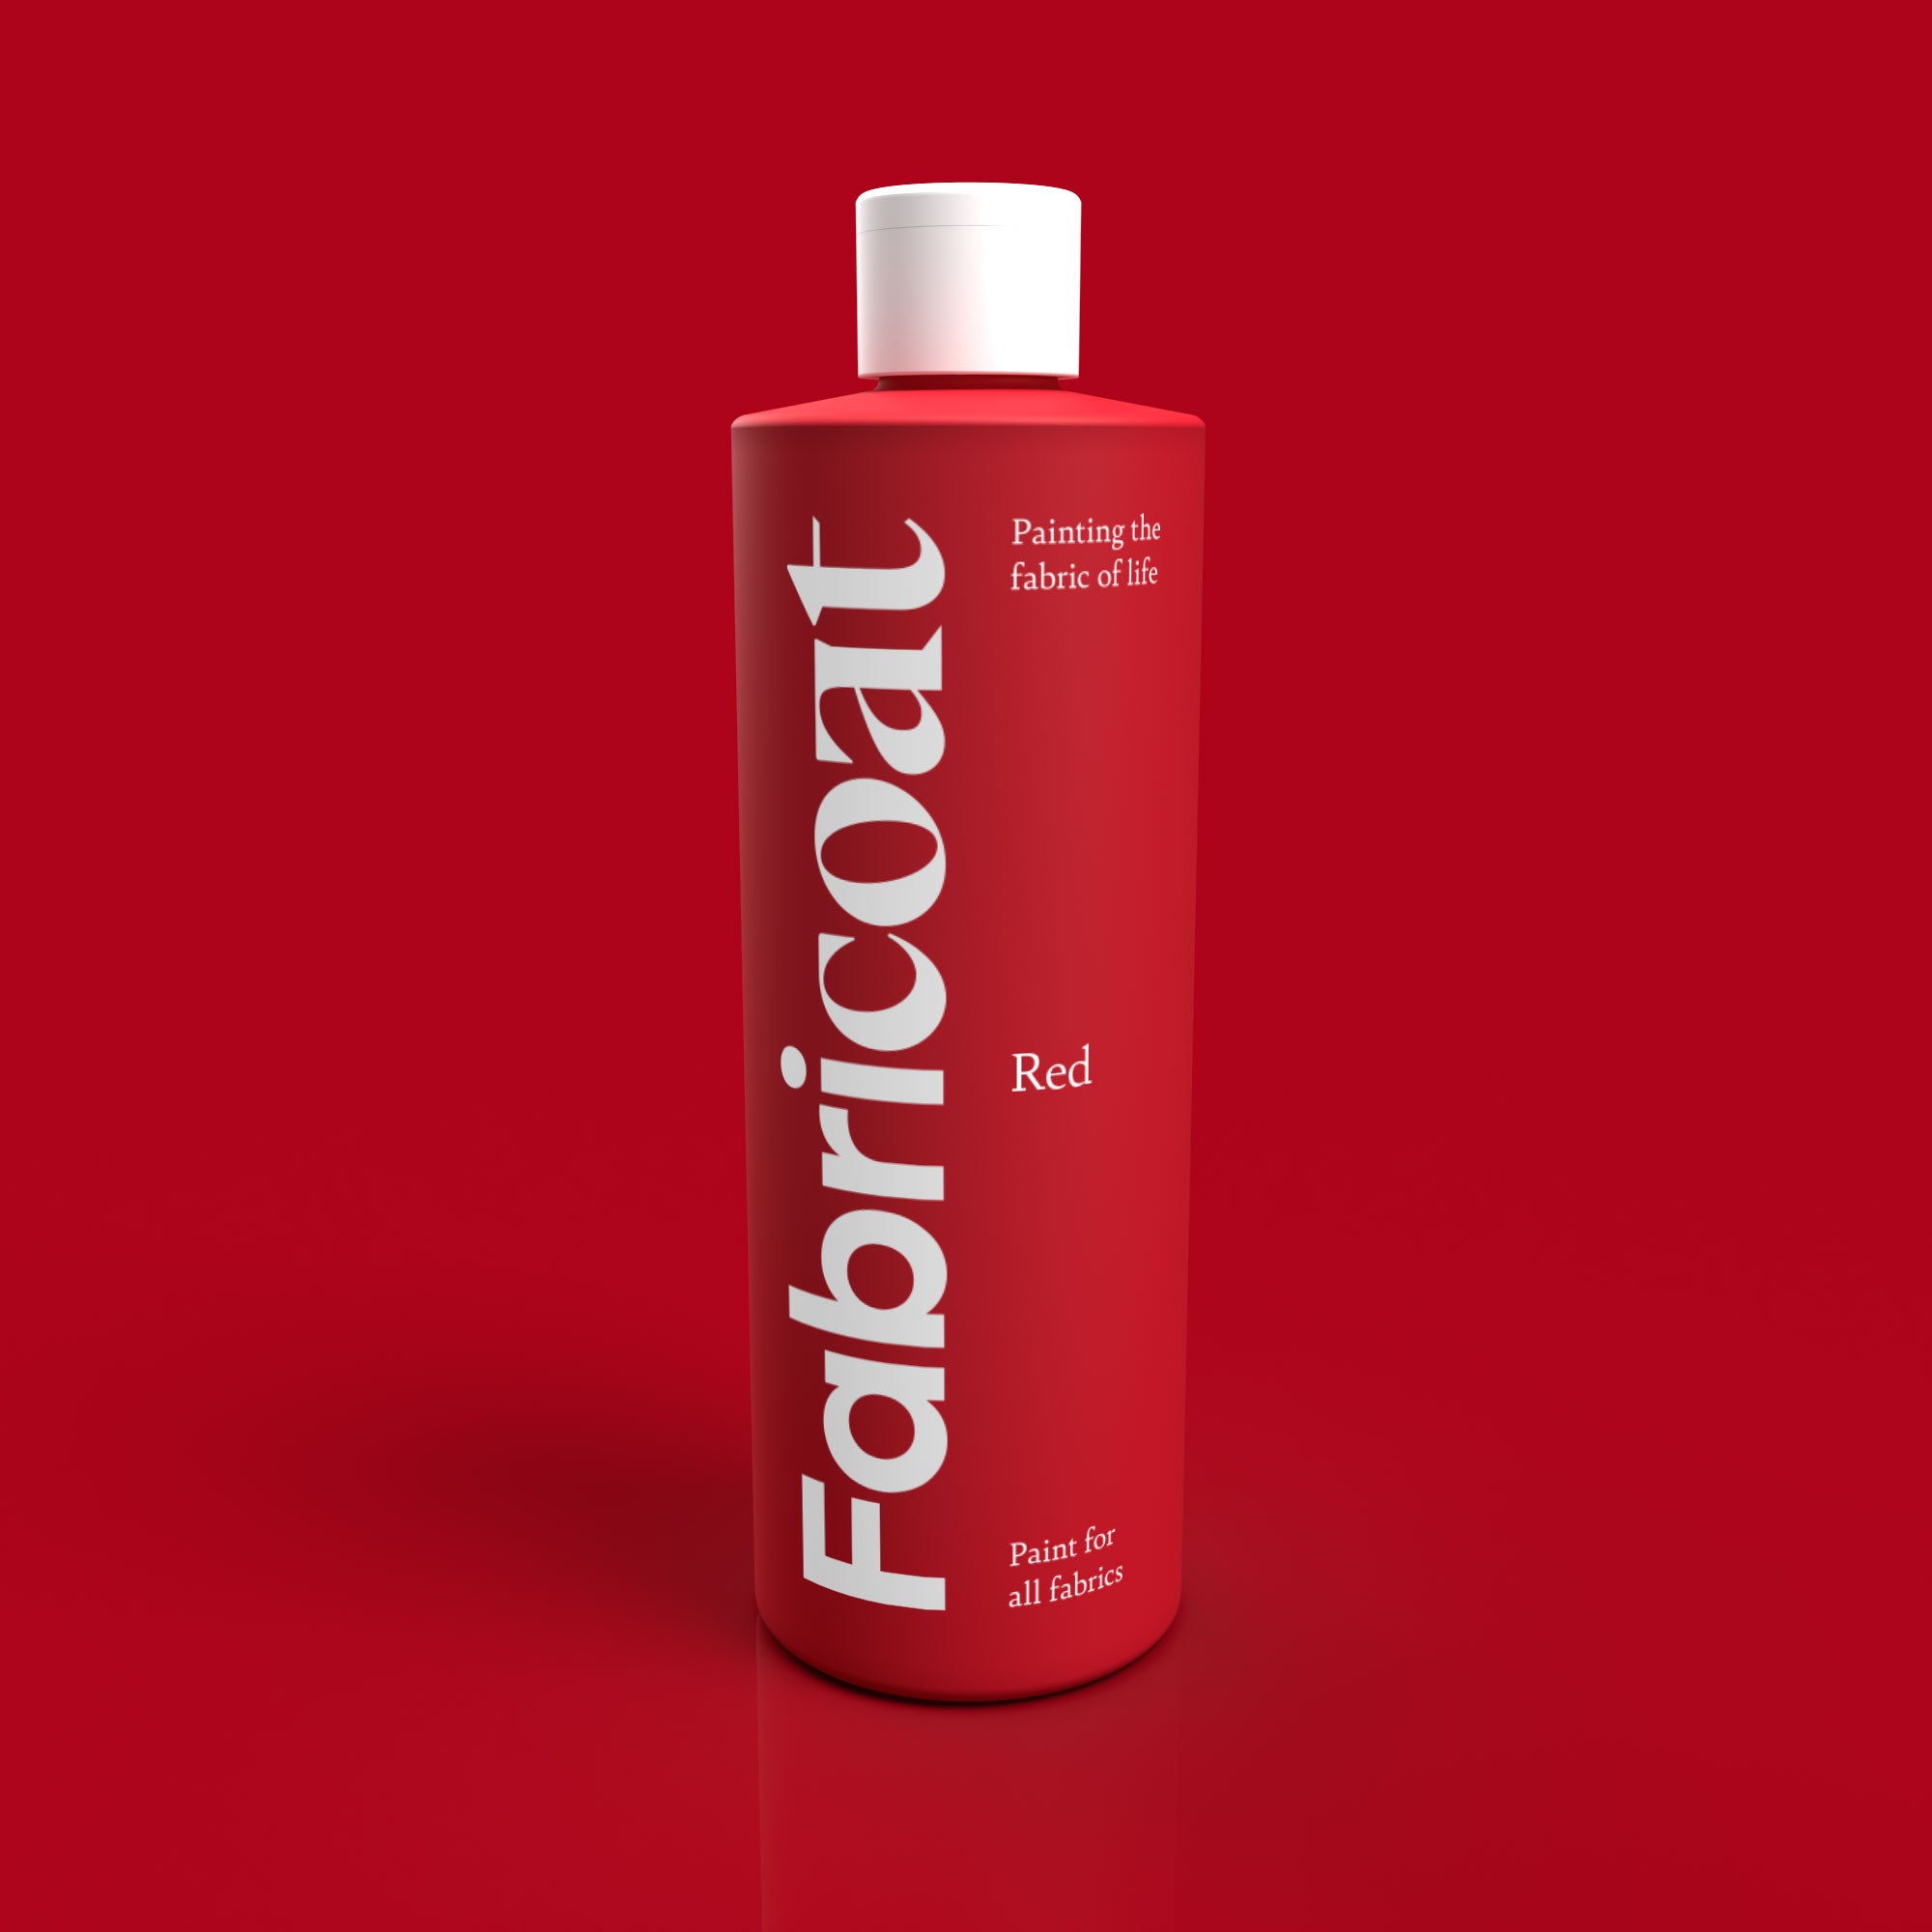 Fabricoat Red Fabric Paint 500ml Bottle